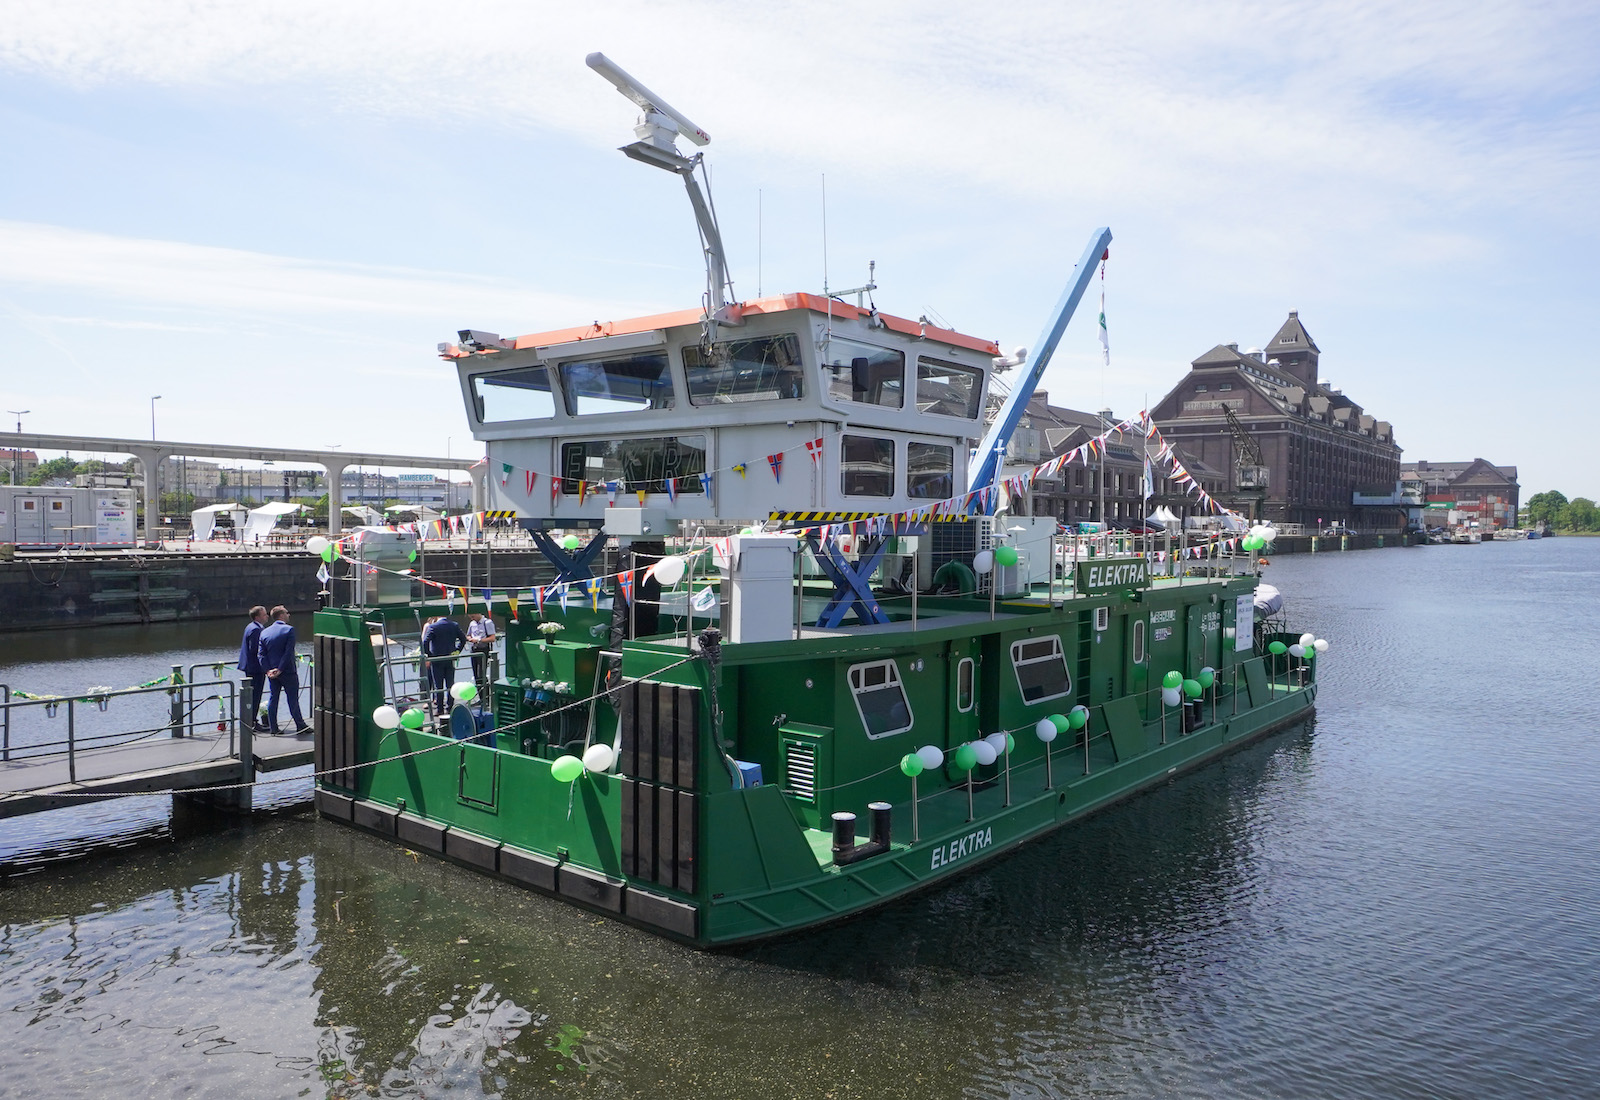 A green pushboat next to a pier